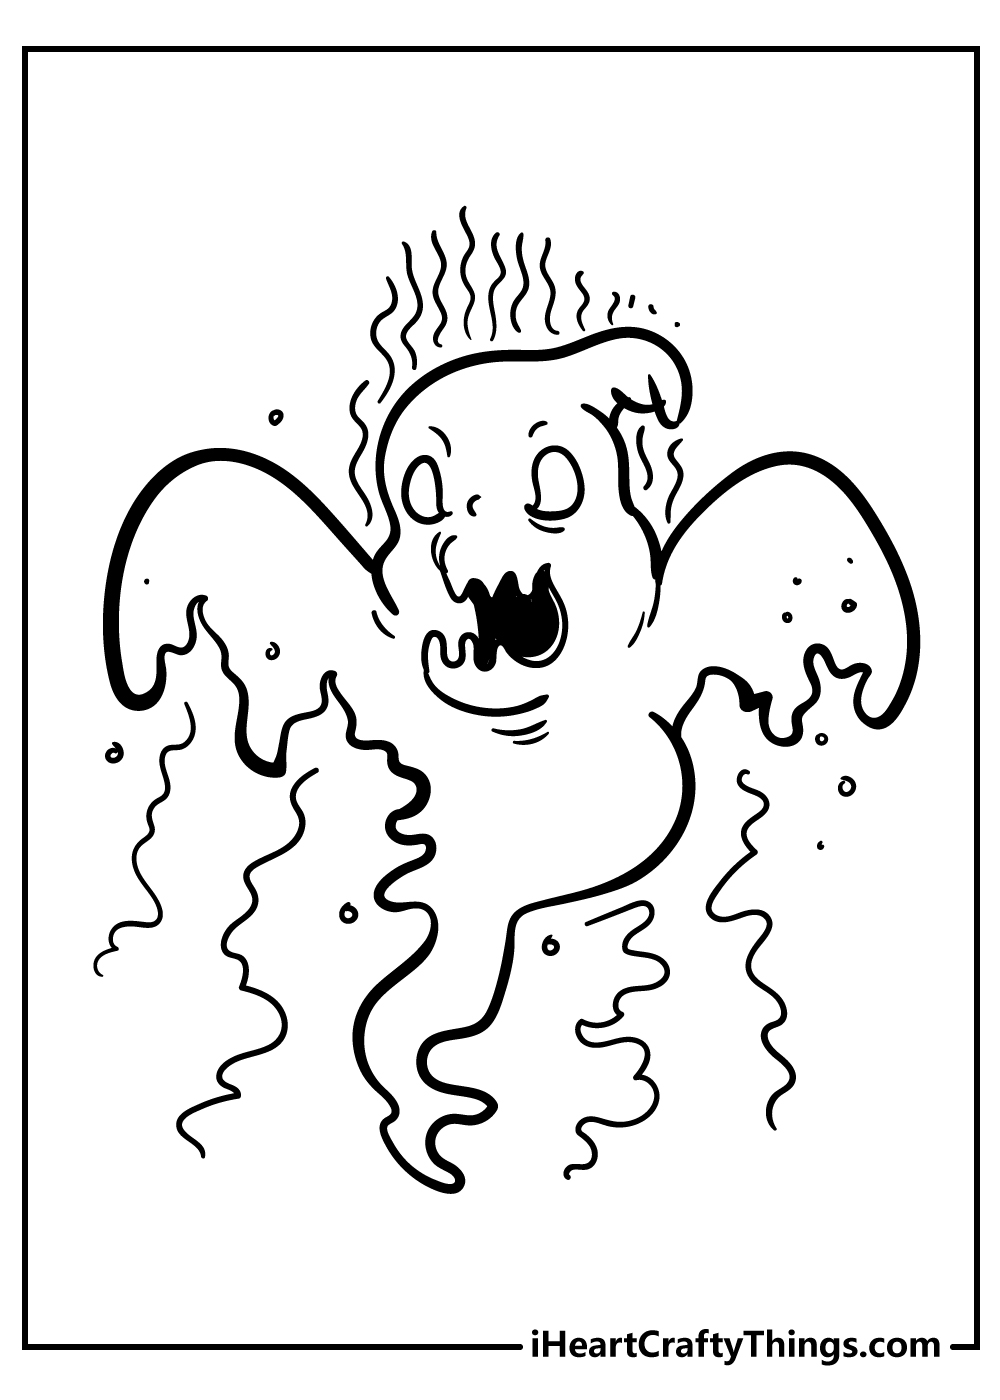 Ghost Coloring Original Sheet for children free download